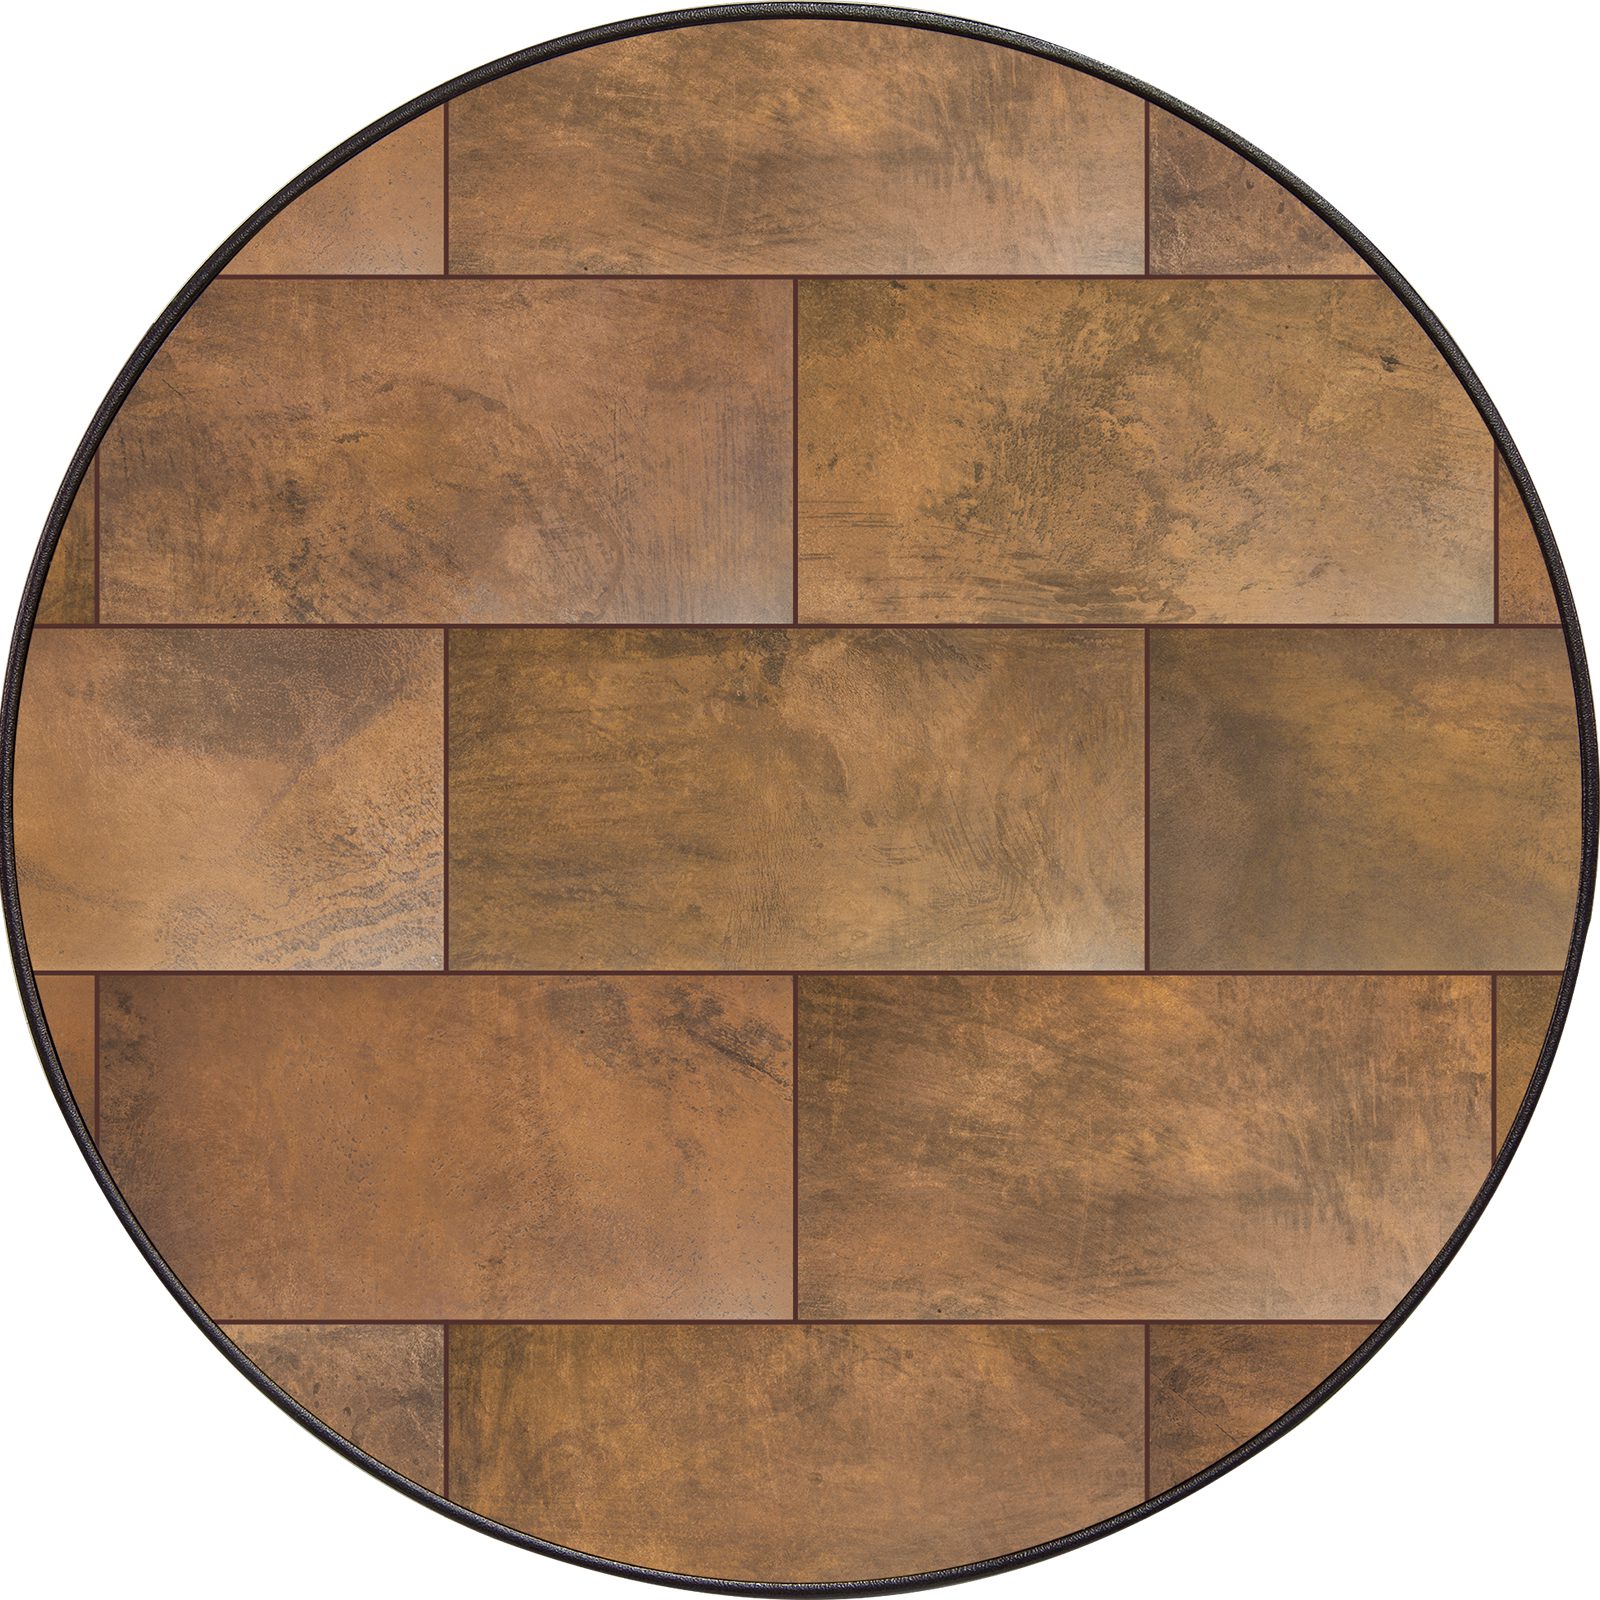 54" Round City Top - Porcelain Table Tops - City Series 37